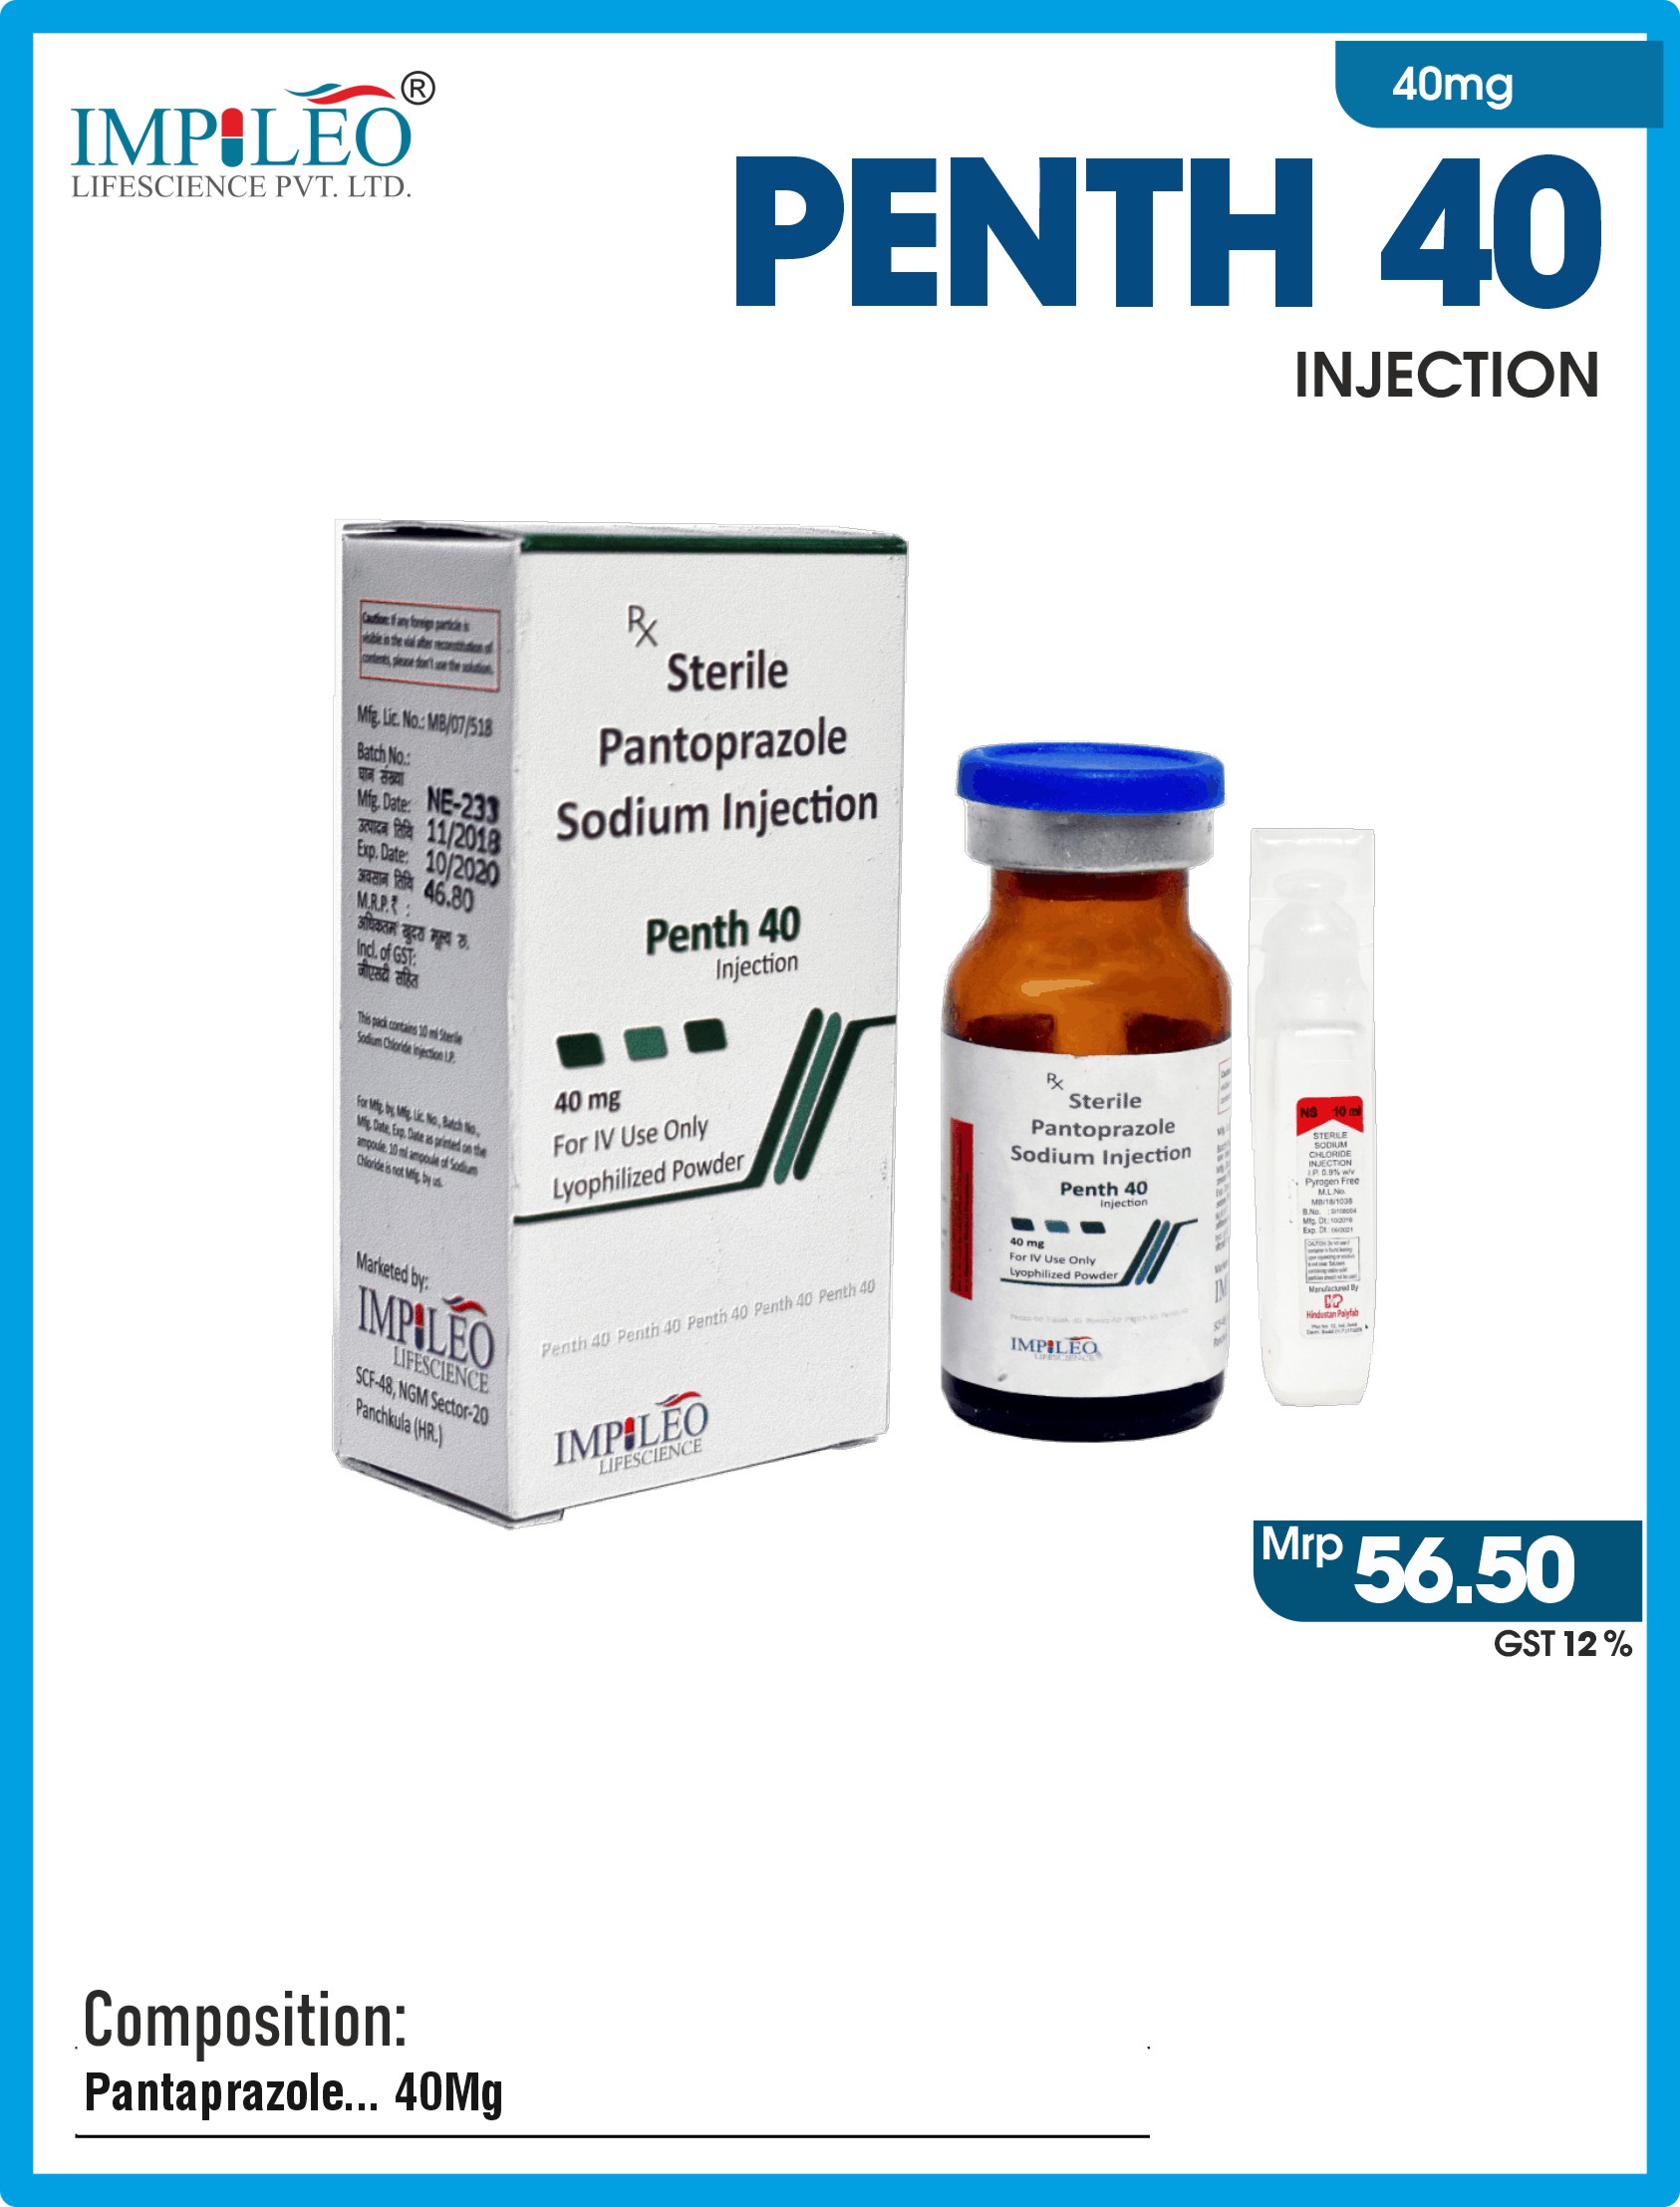 Maximize Comfort with PENTH 40 (Pantoprazole) Injection: PCD Pharma Franchise in India